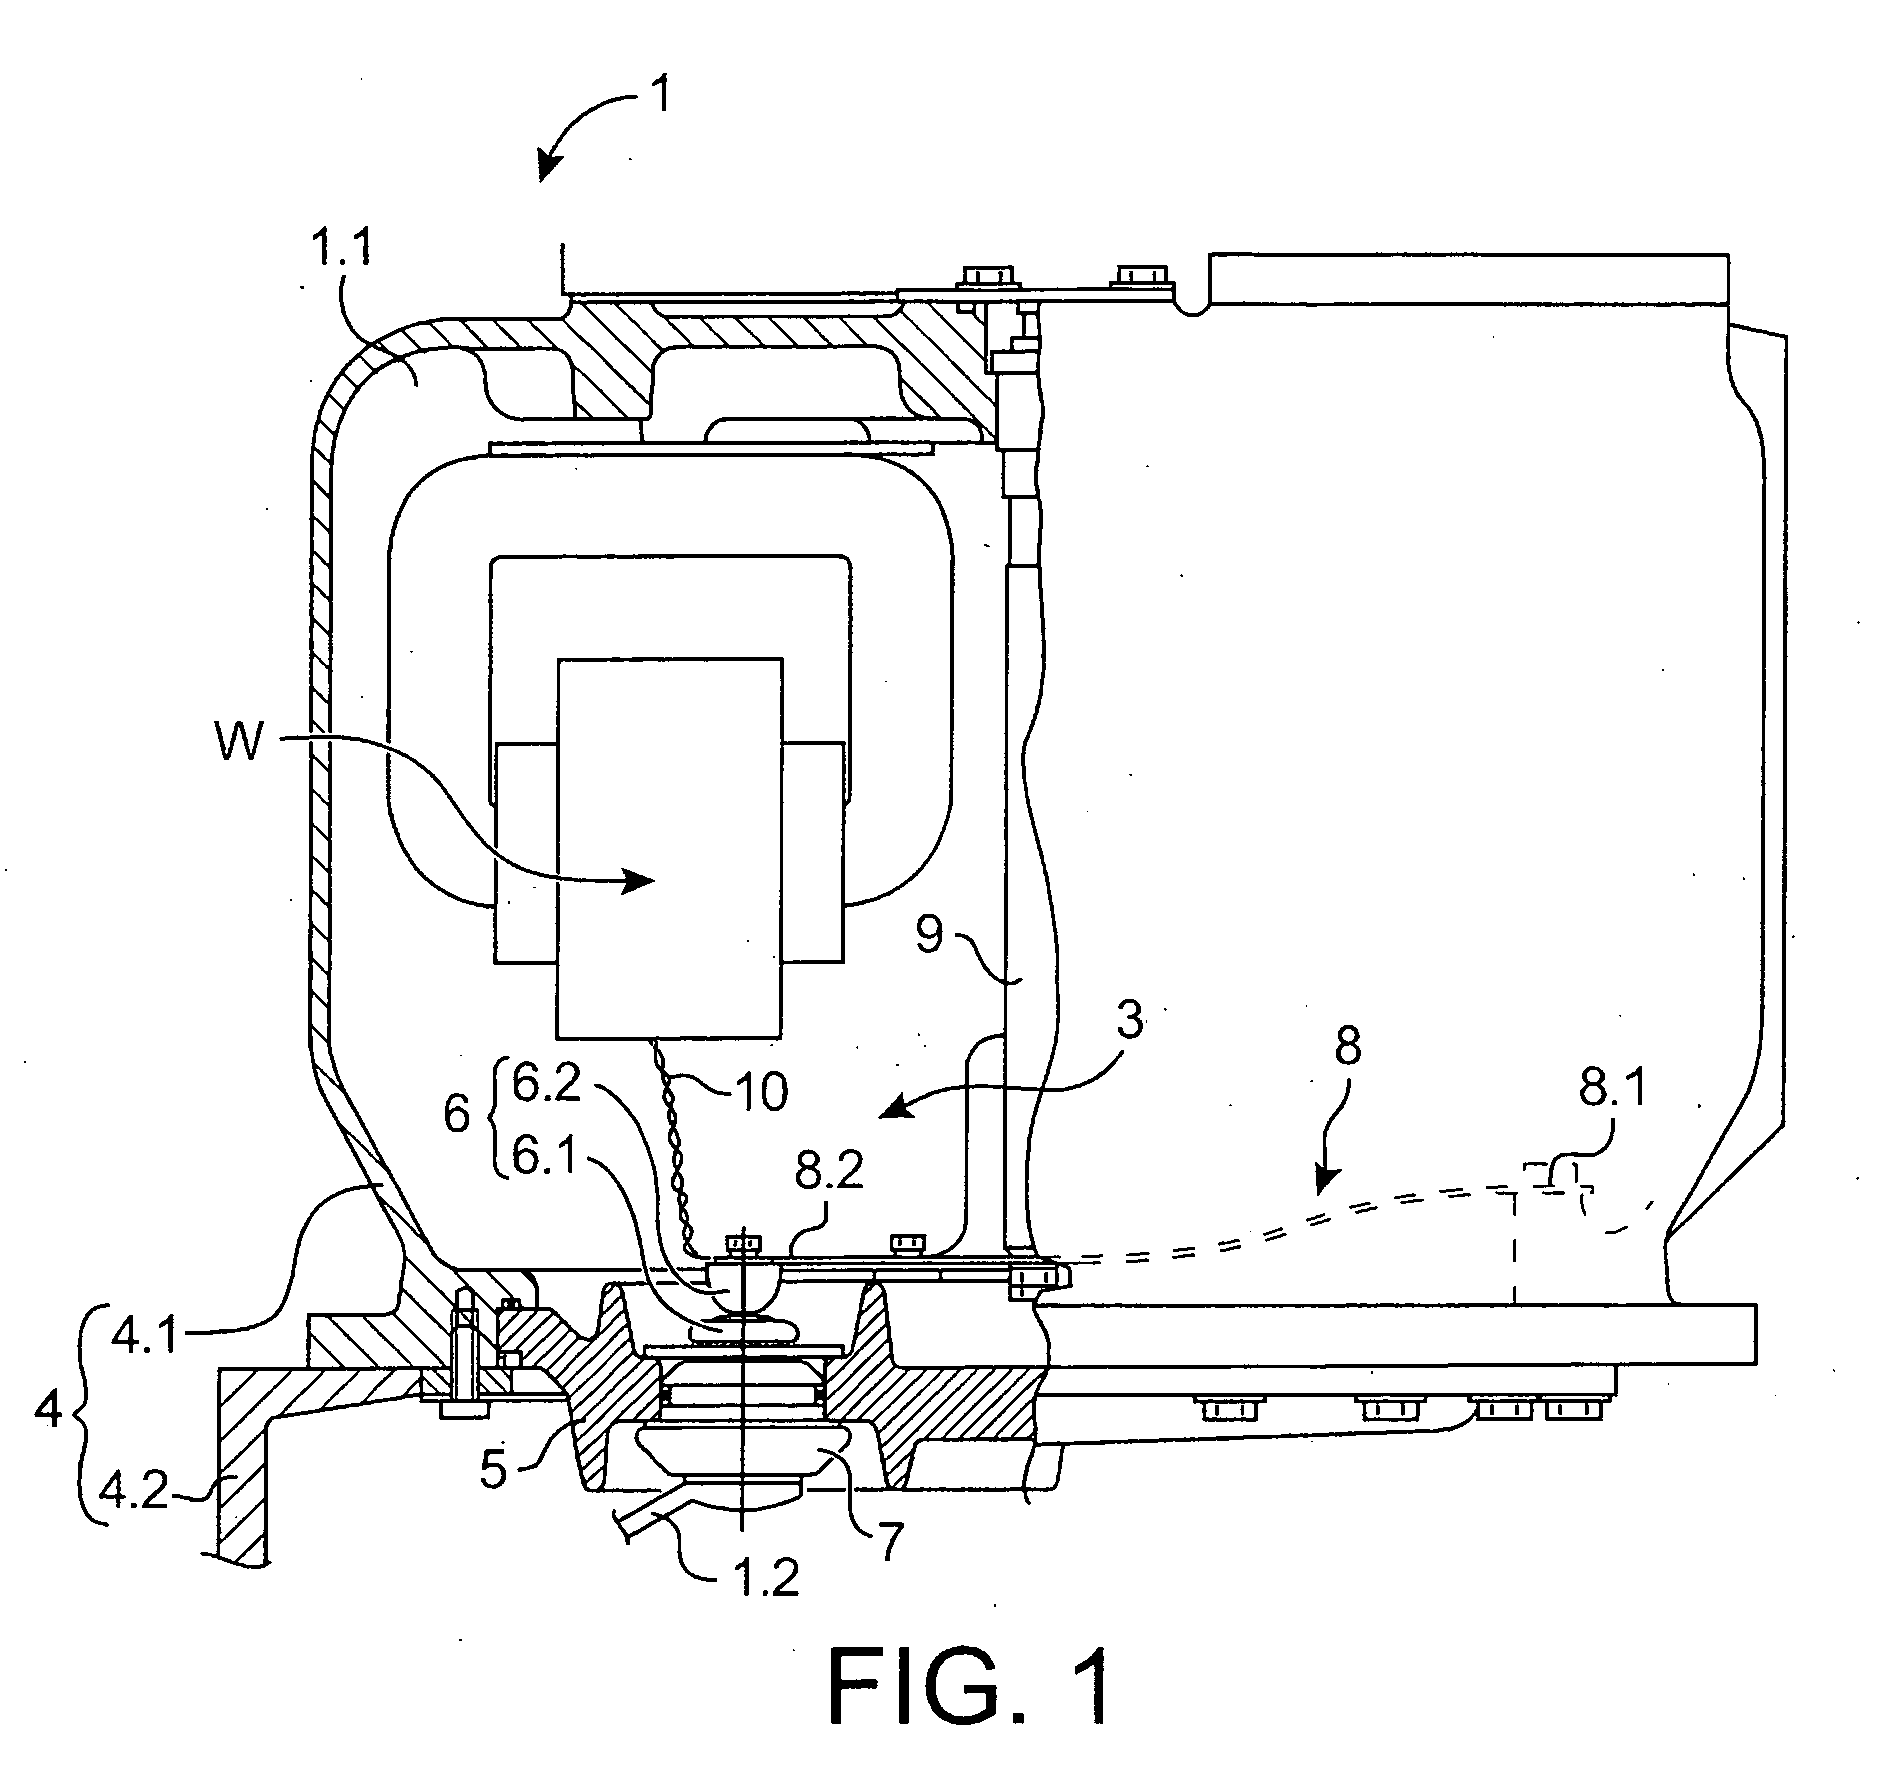 Electrical energy disconnection device